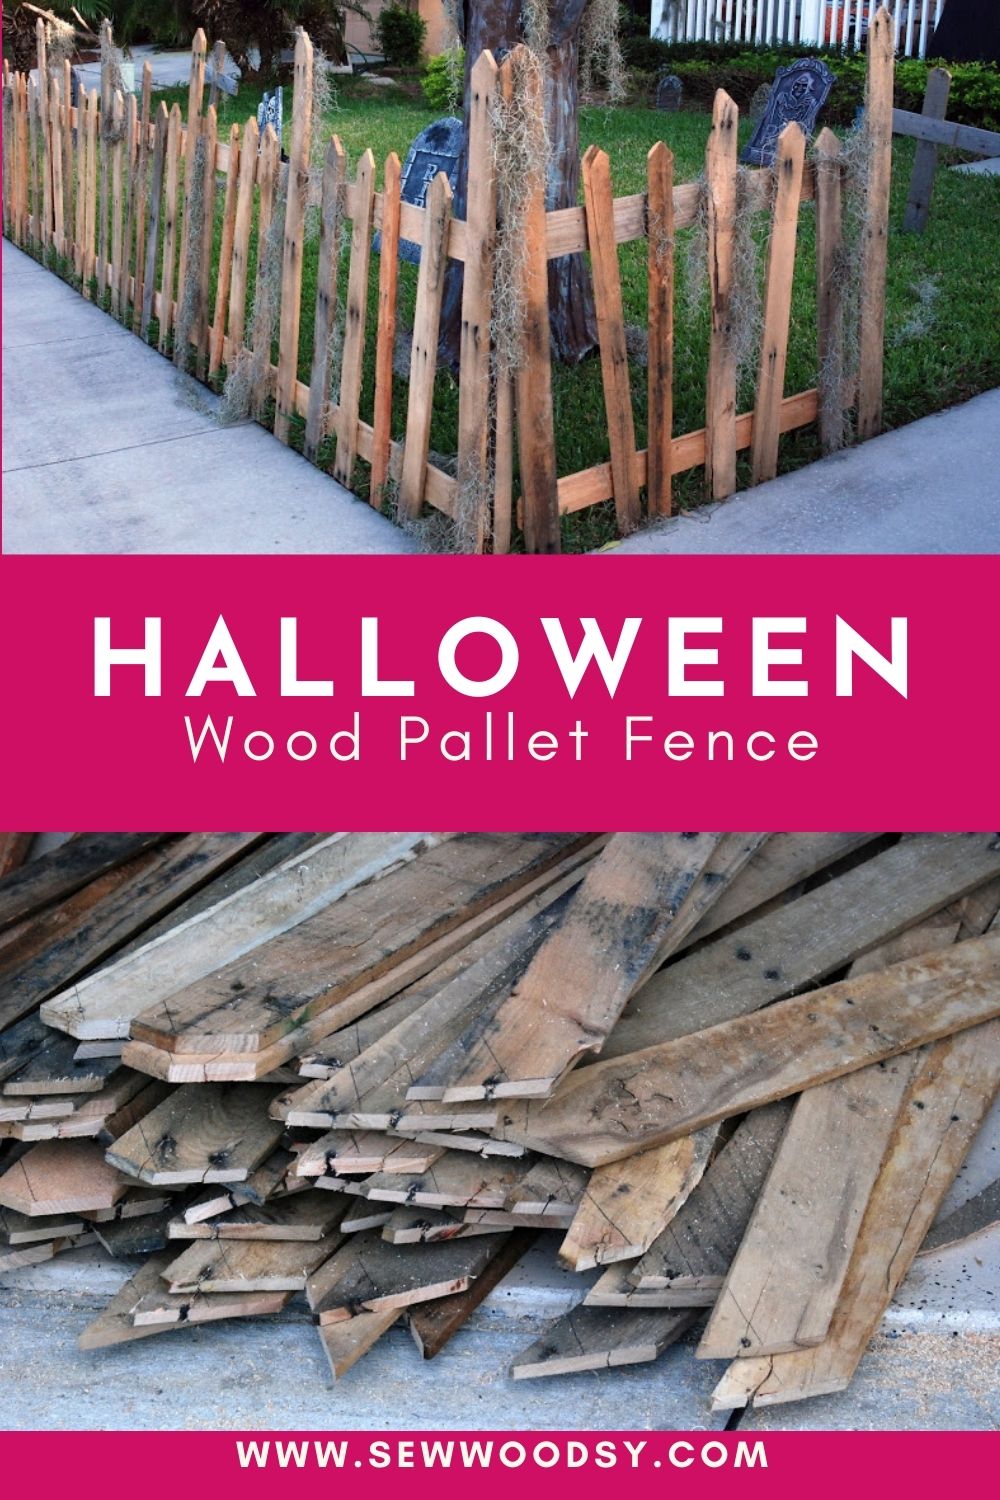 Two photos: Top of wood pallet fence, bottom of pallet spikes. with text on image for Pinterest.